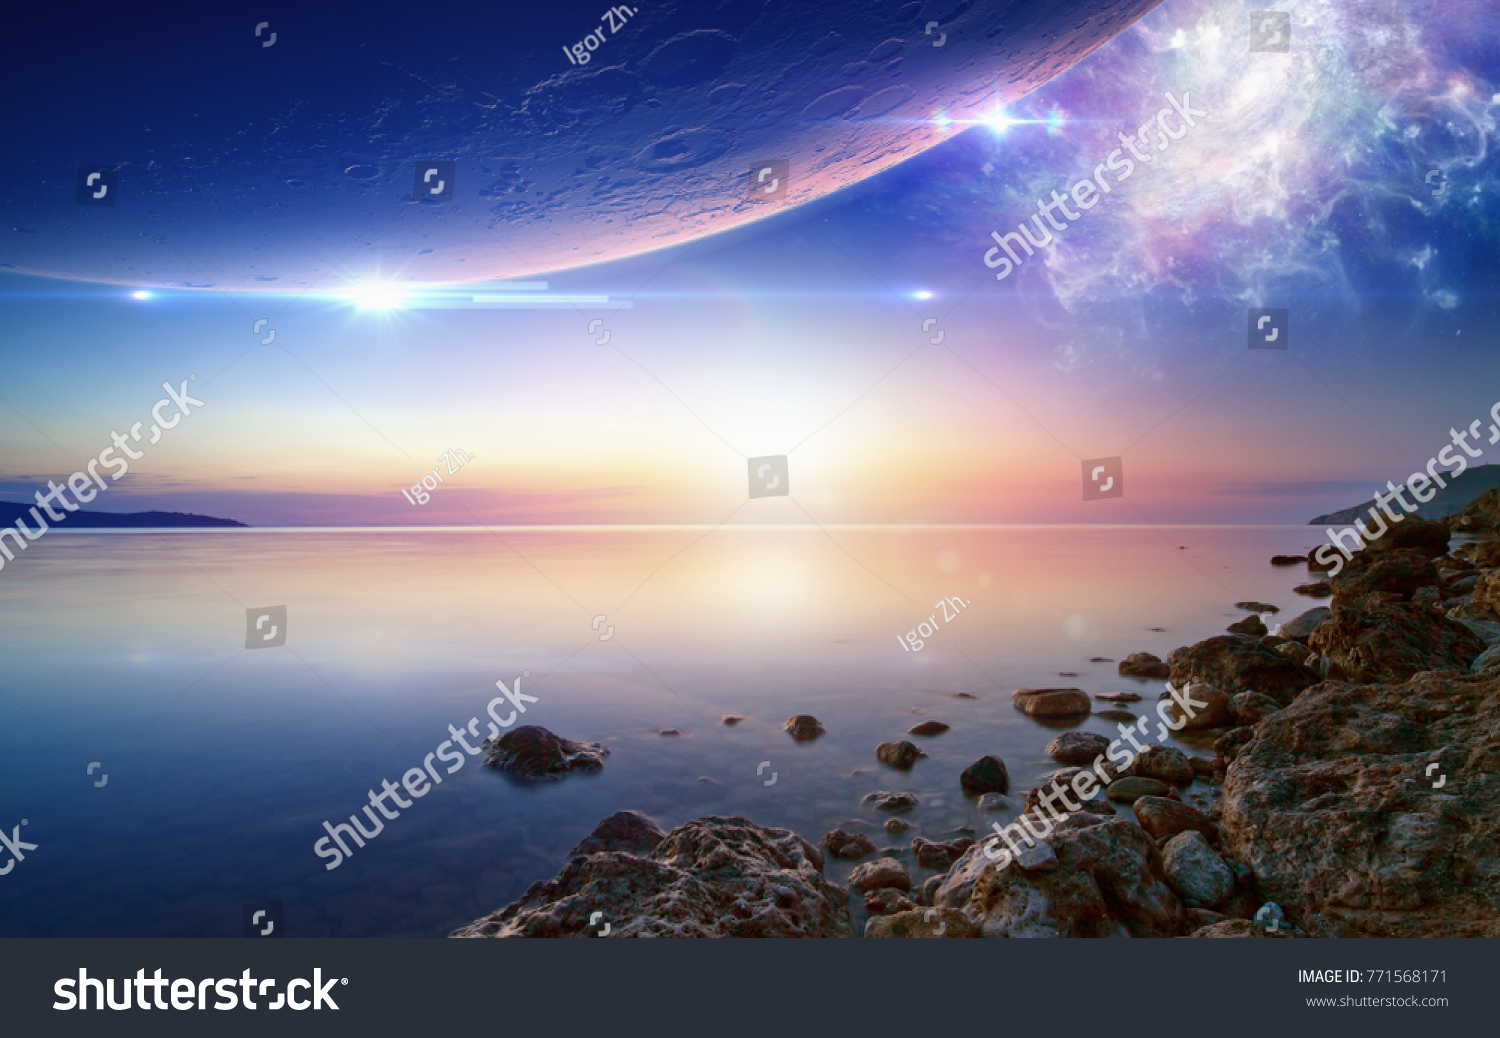 Tranquil Wallpaper Ambient Chillout Music Beautiful Stock Photo